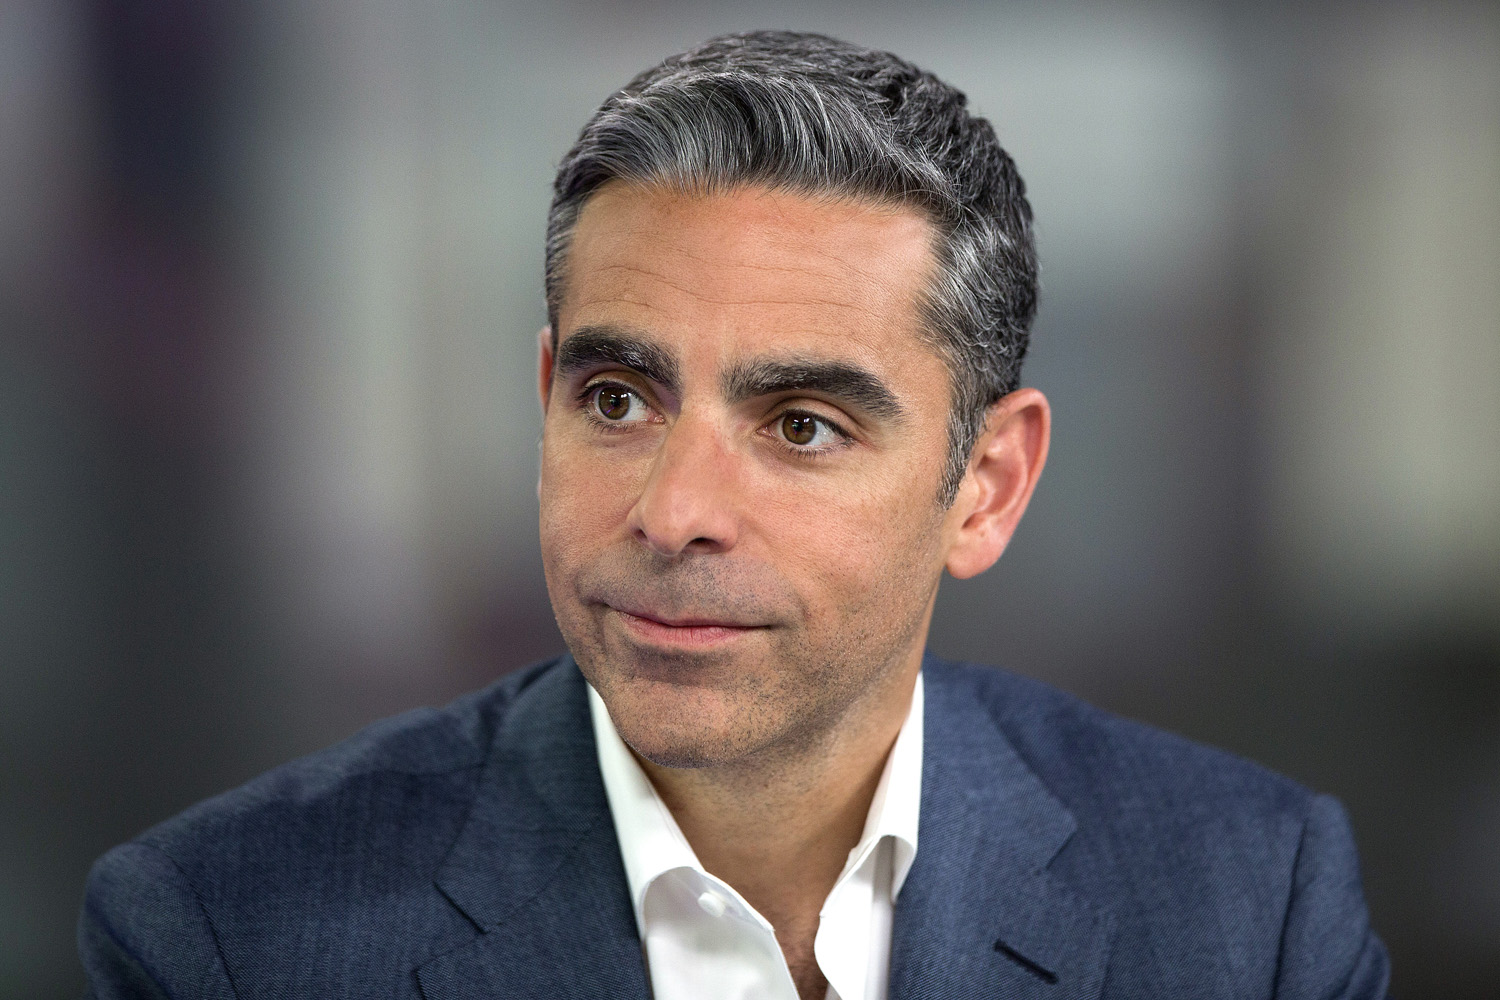 David Marcus, president of PayPal, had his credit card information stolen while in the United Kingdom. (Simon Dawson&mdash;Bloomberg/Getty Images)